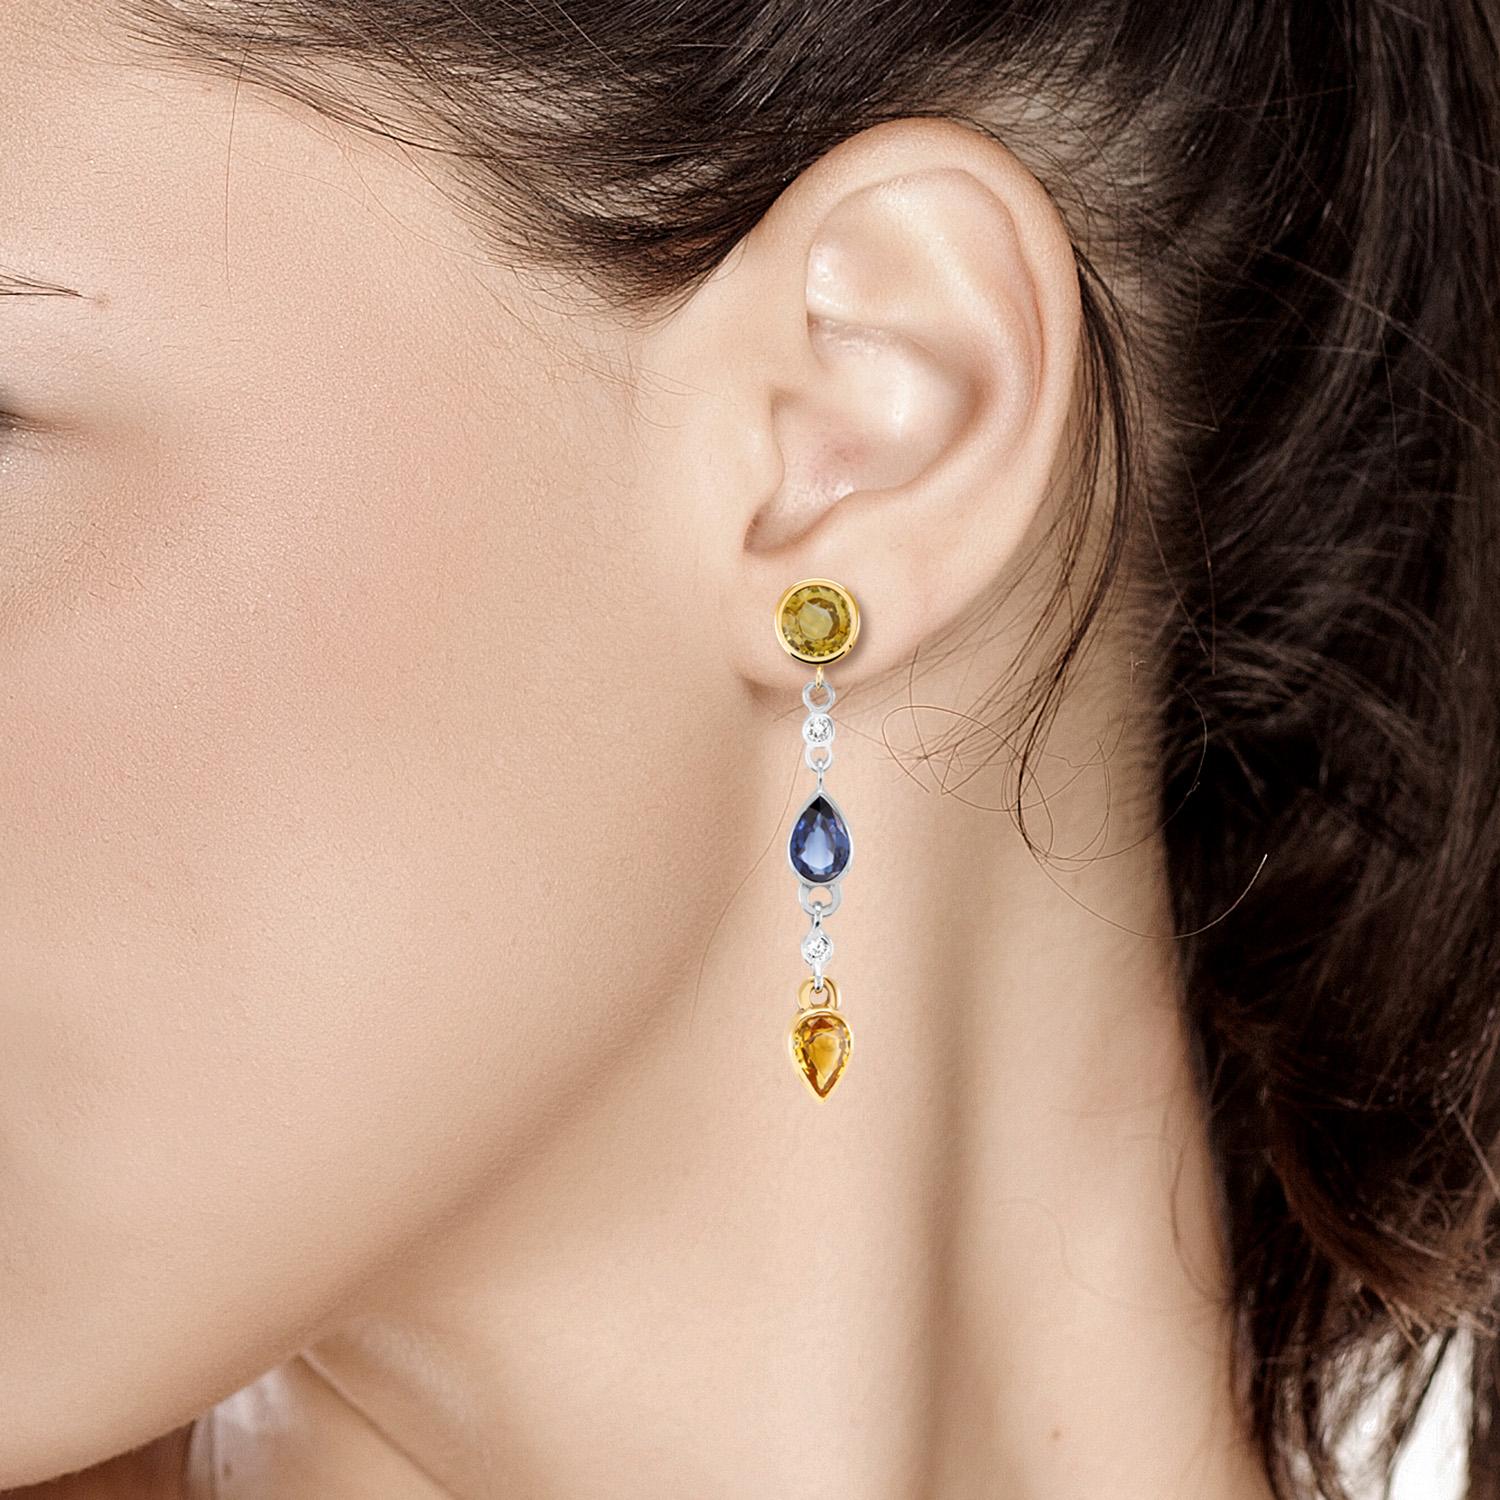 Pear Cut Yellow and Blue Sapphire Diamond Earrings Weighing 5.36 Carat 1.5 Inch Long